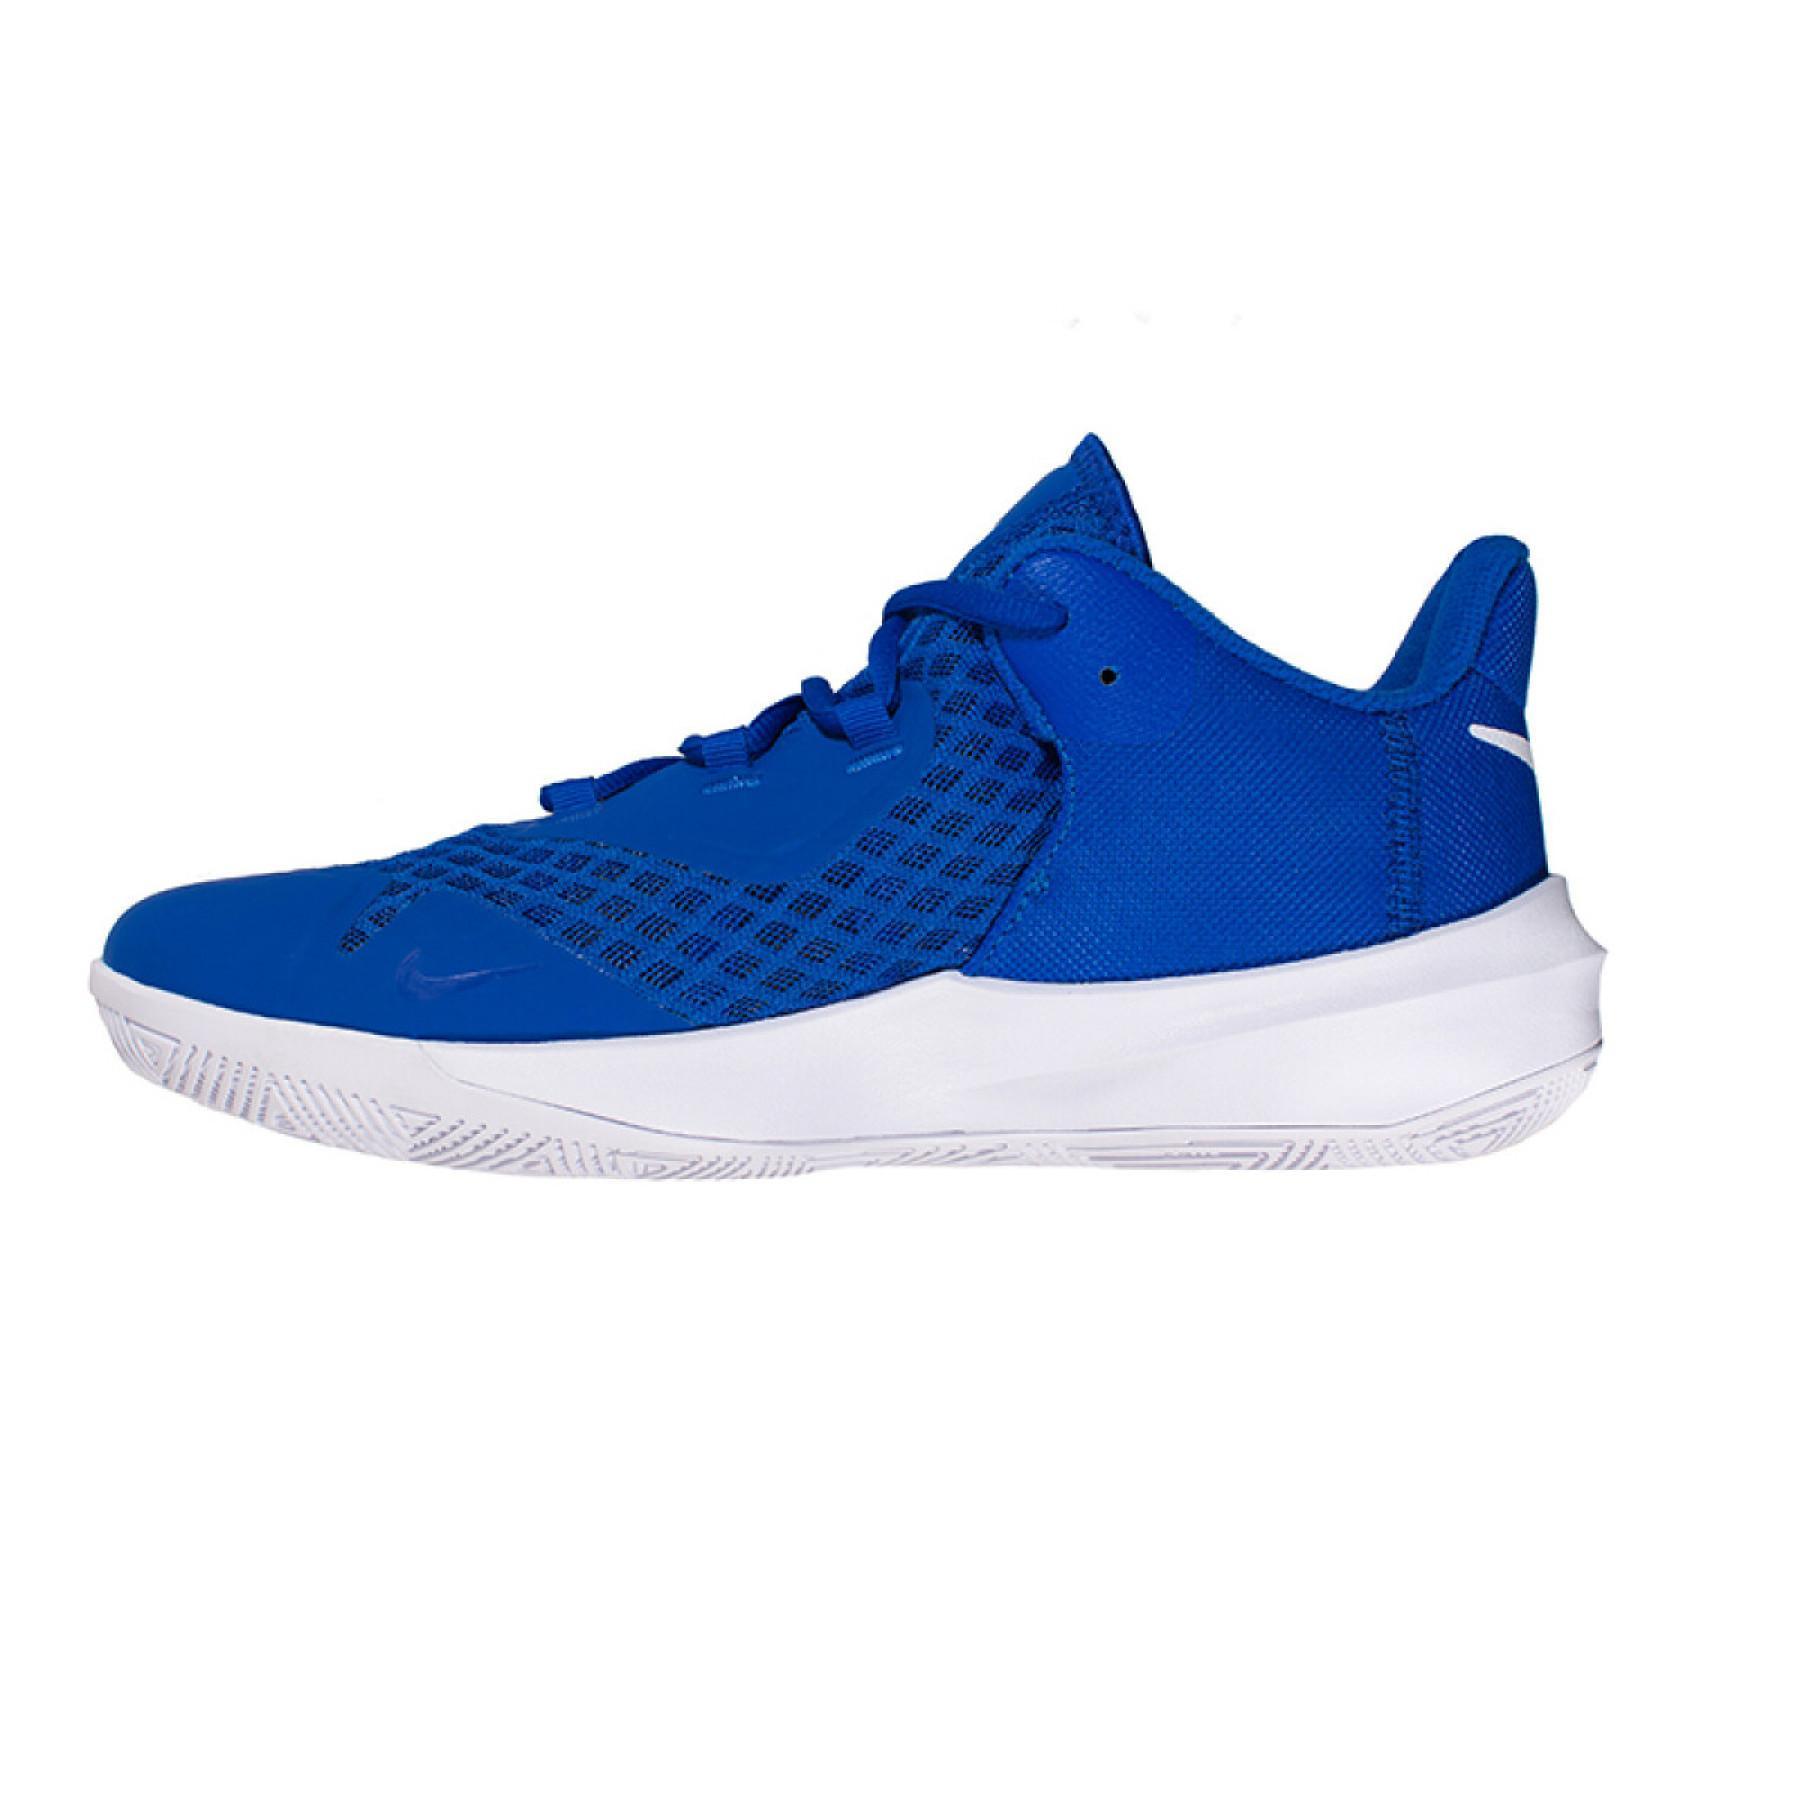 Zapatos Nike Hyperspeed Court